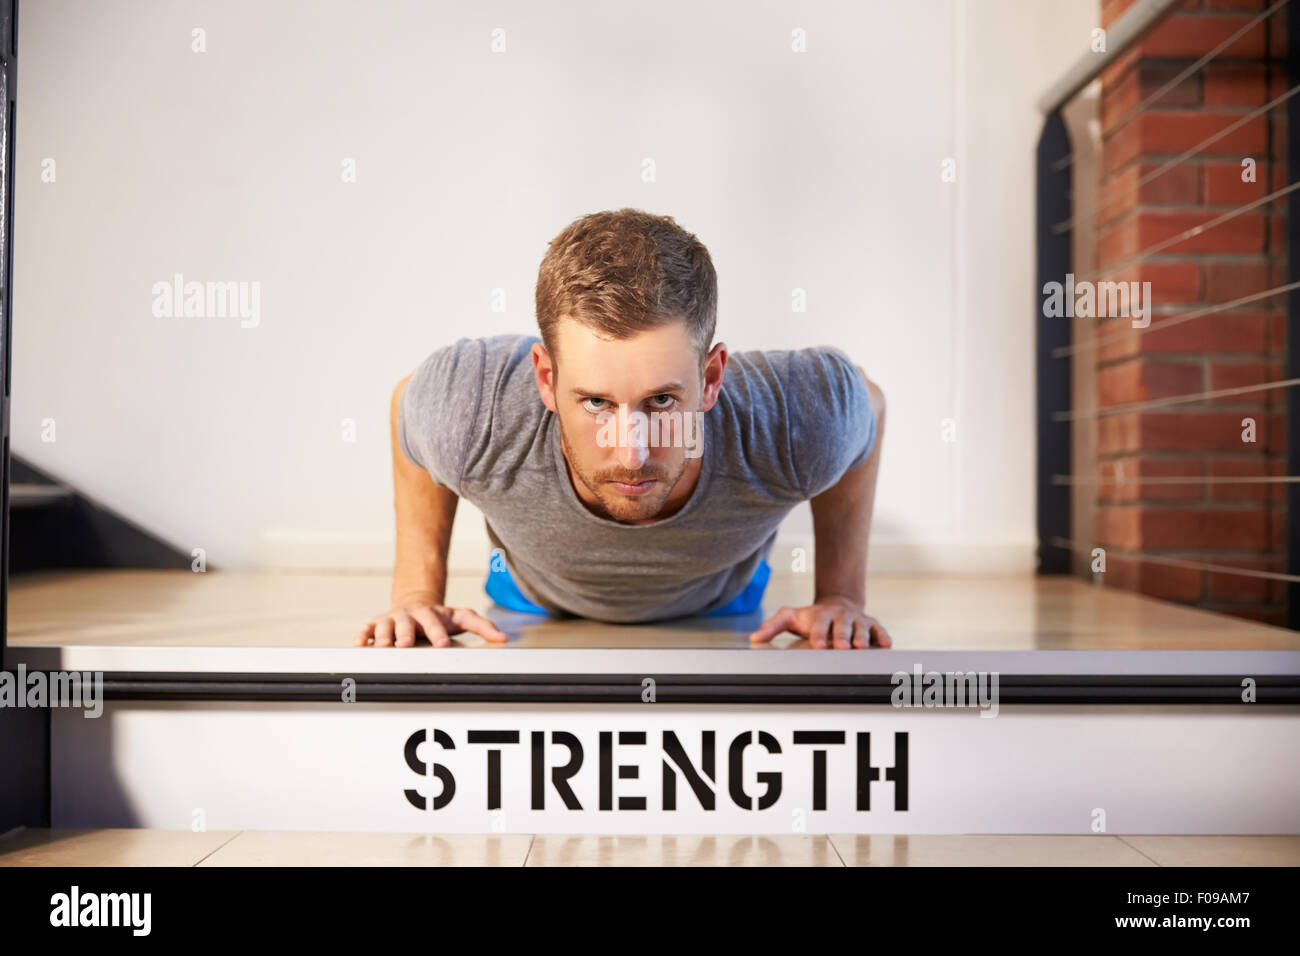 Man In Gym Doing Press-Ups On Step Labeled Strength Stock Photo